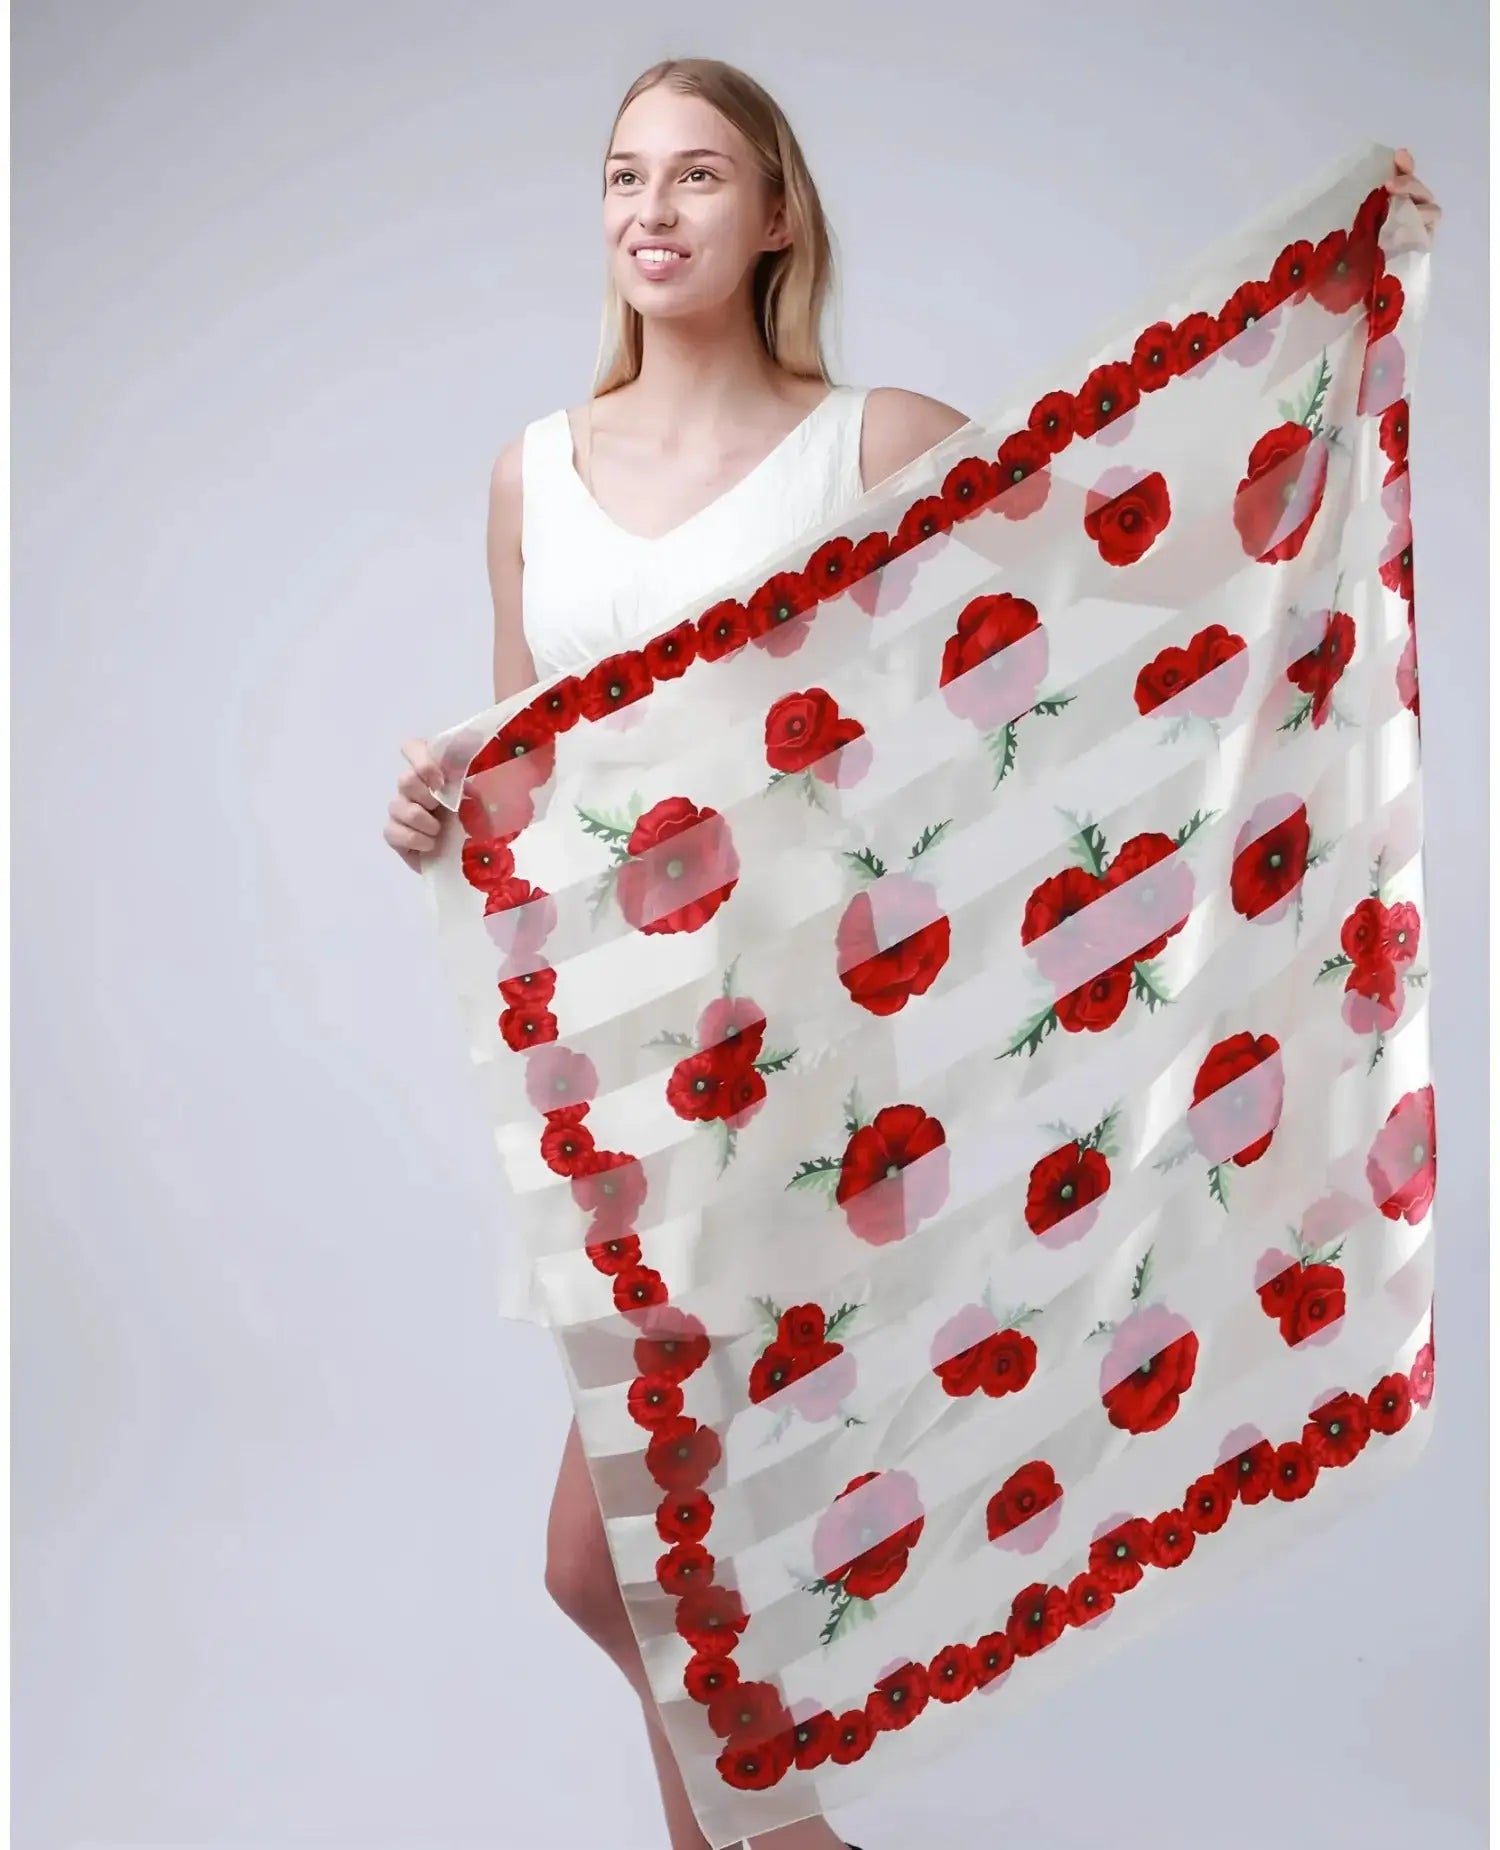 Large square poppy scarf held by woman